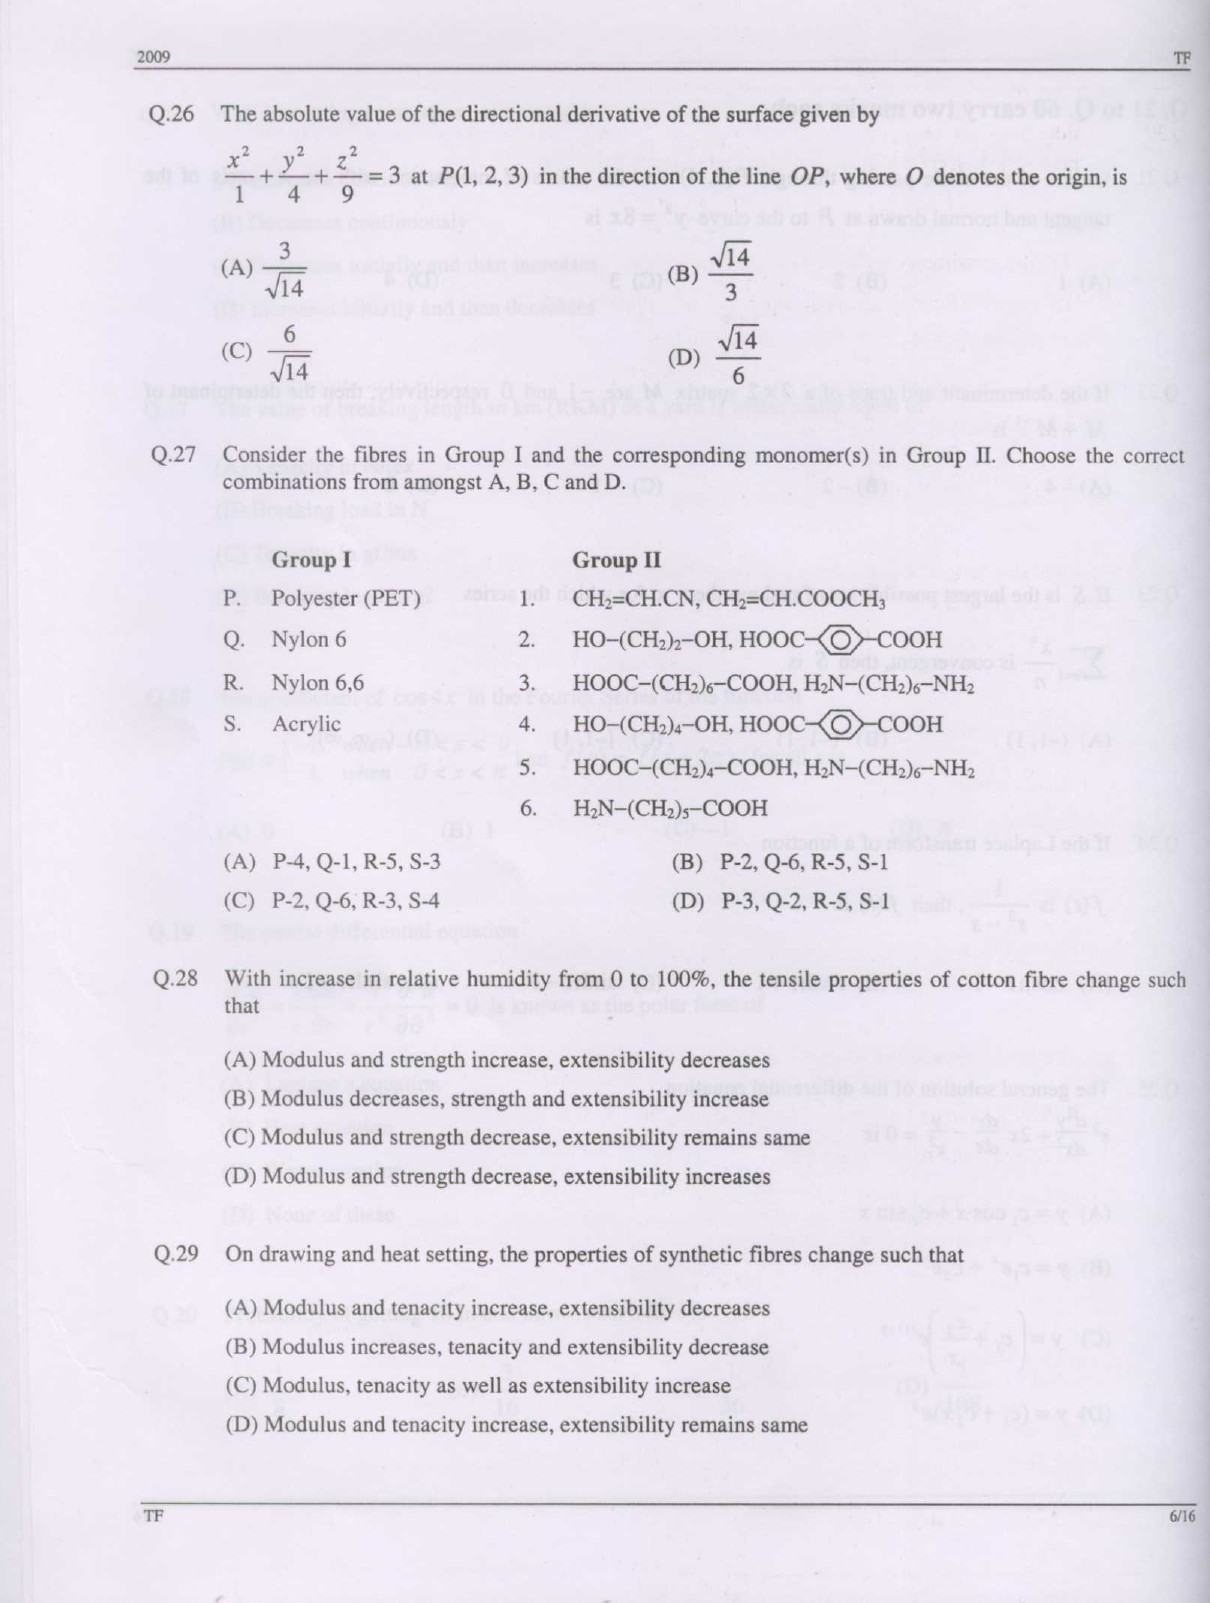 GATE Exam Question Paper 2009 Textile Engineering and Fibre Science 6